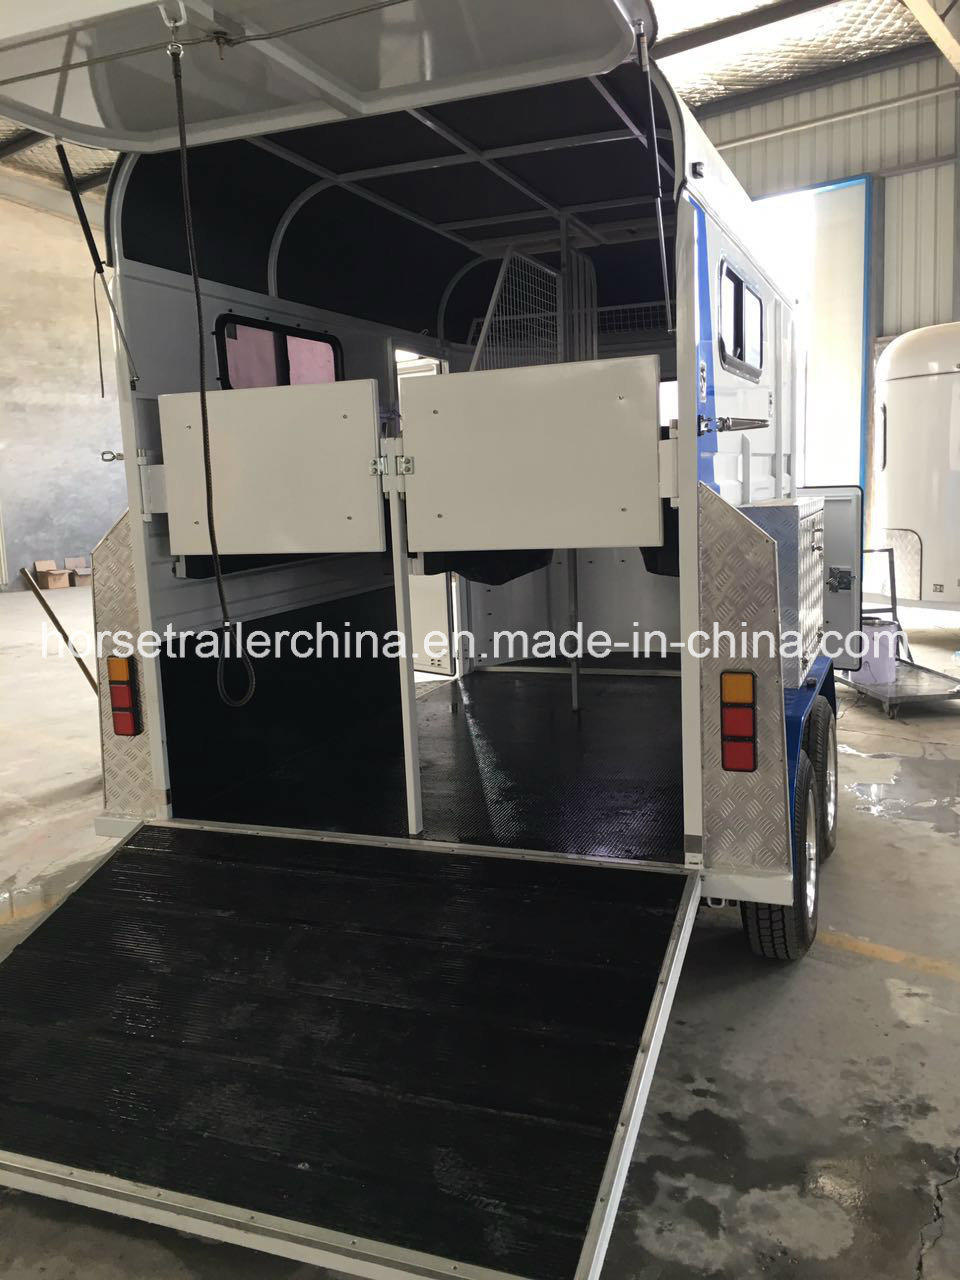 China Straight Load Horse Trailer/Horse Float Hot Sale in Australia